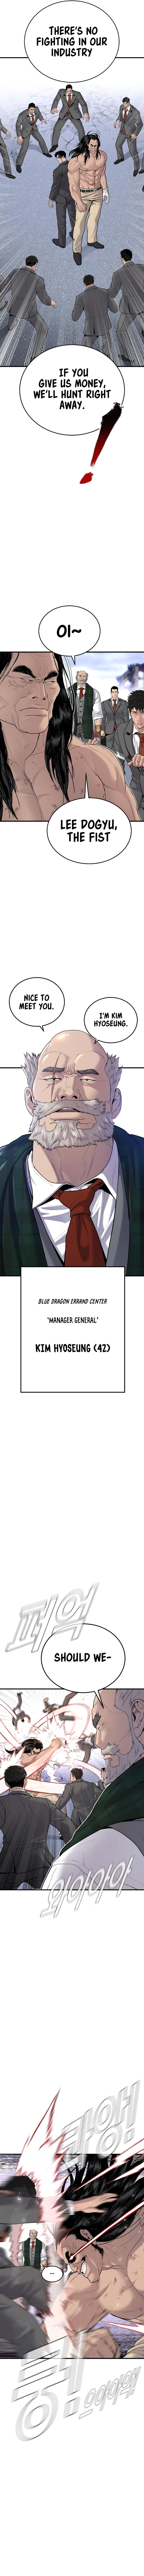 Manager Kim - Chapter 68 Page 2